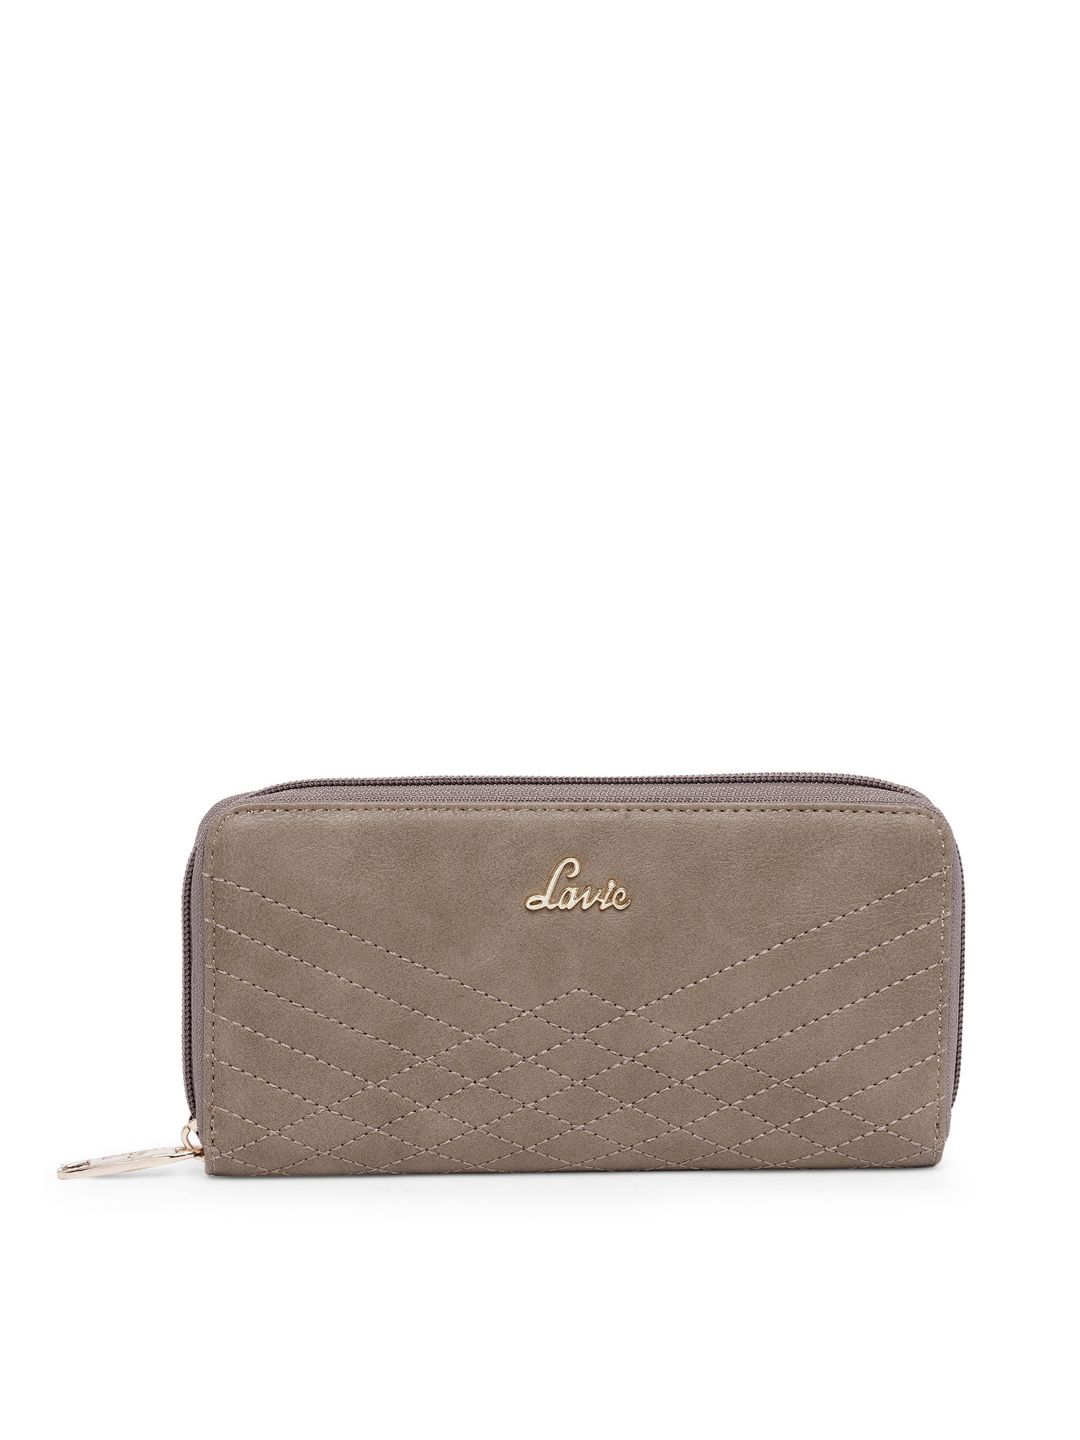 Lavie Women Taupe Solid Zip Around Wallet Price in India